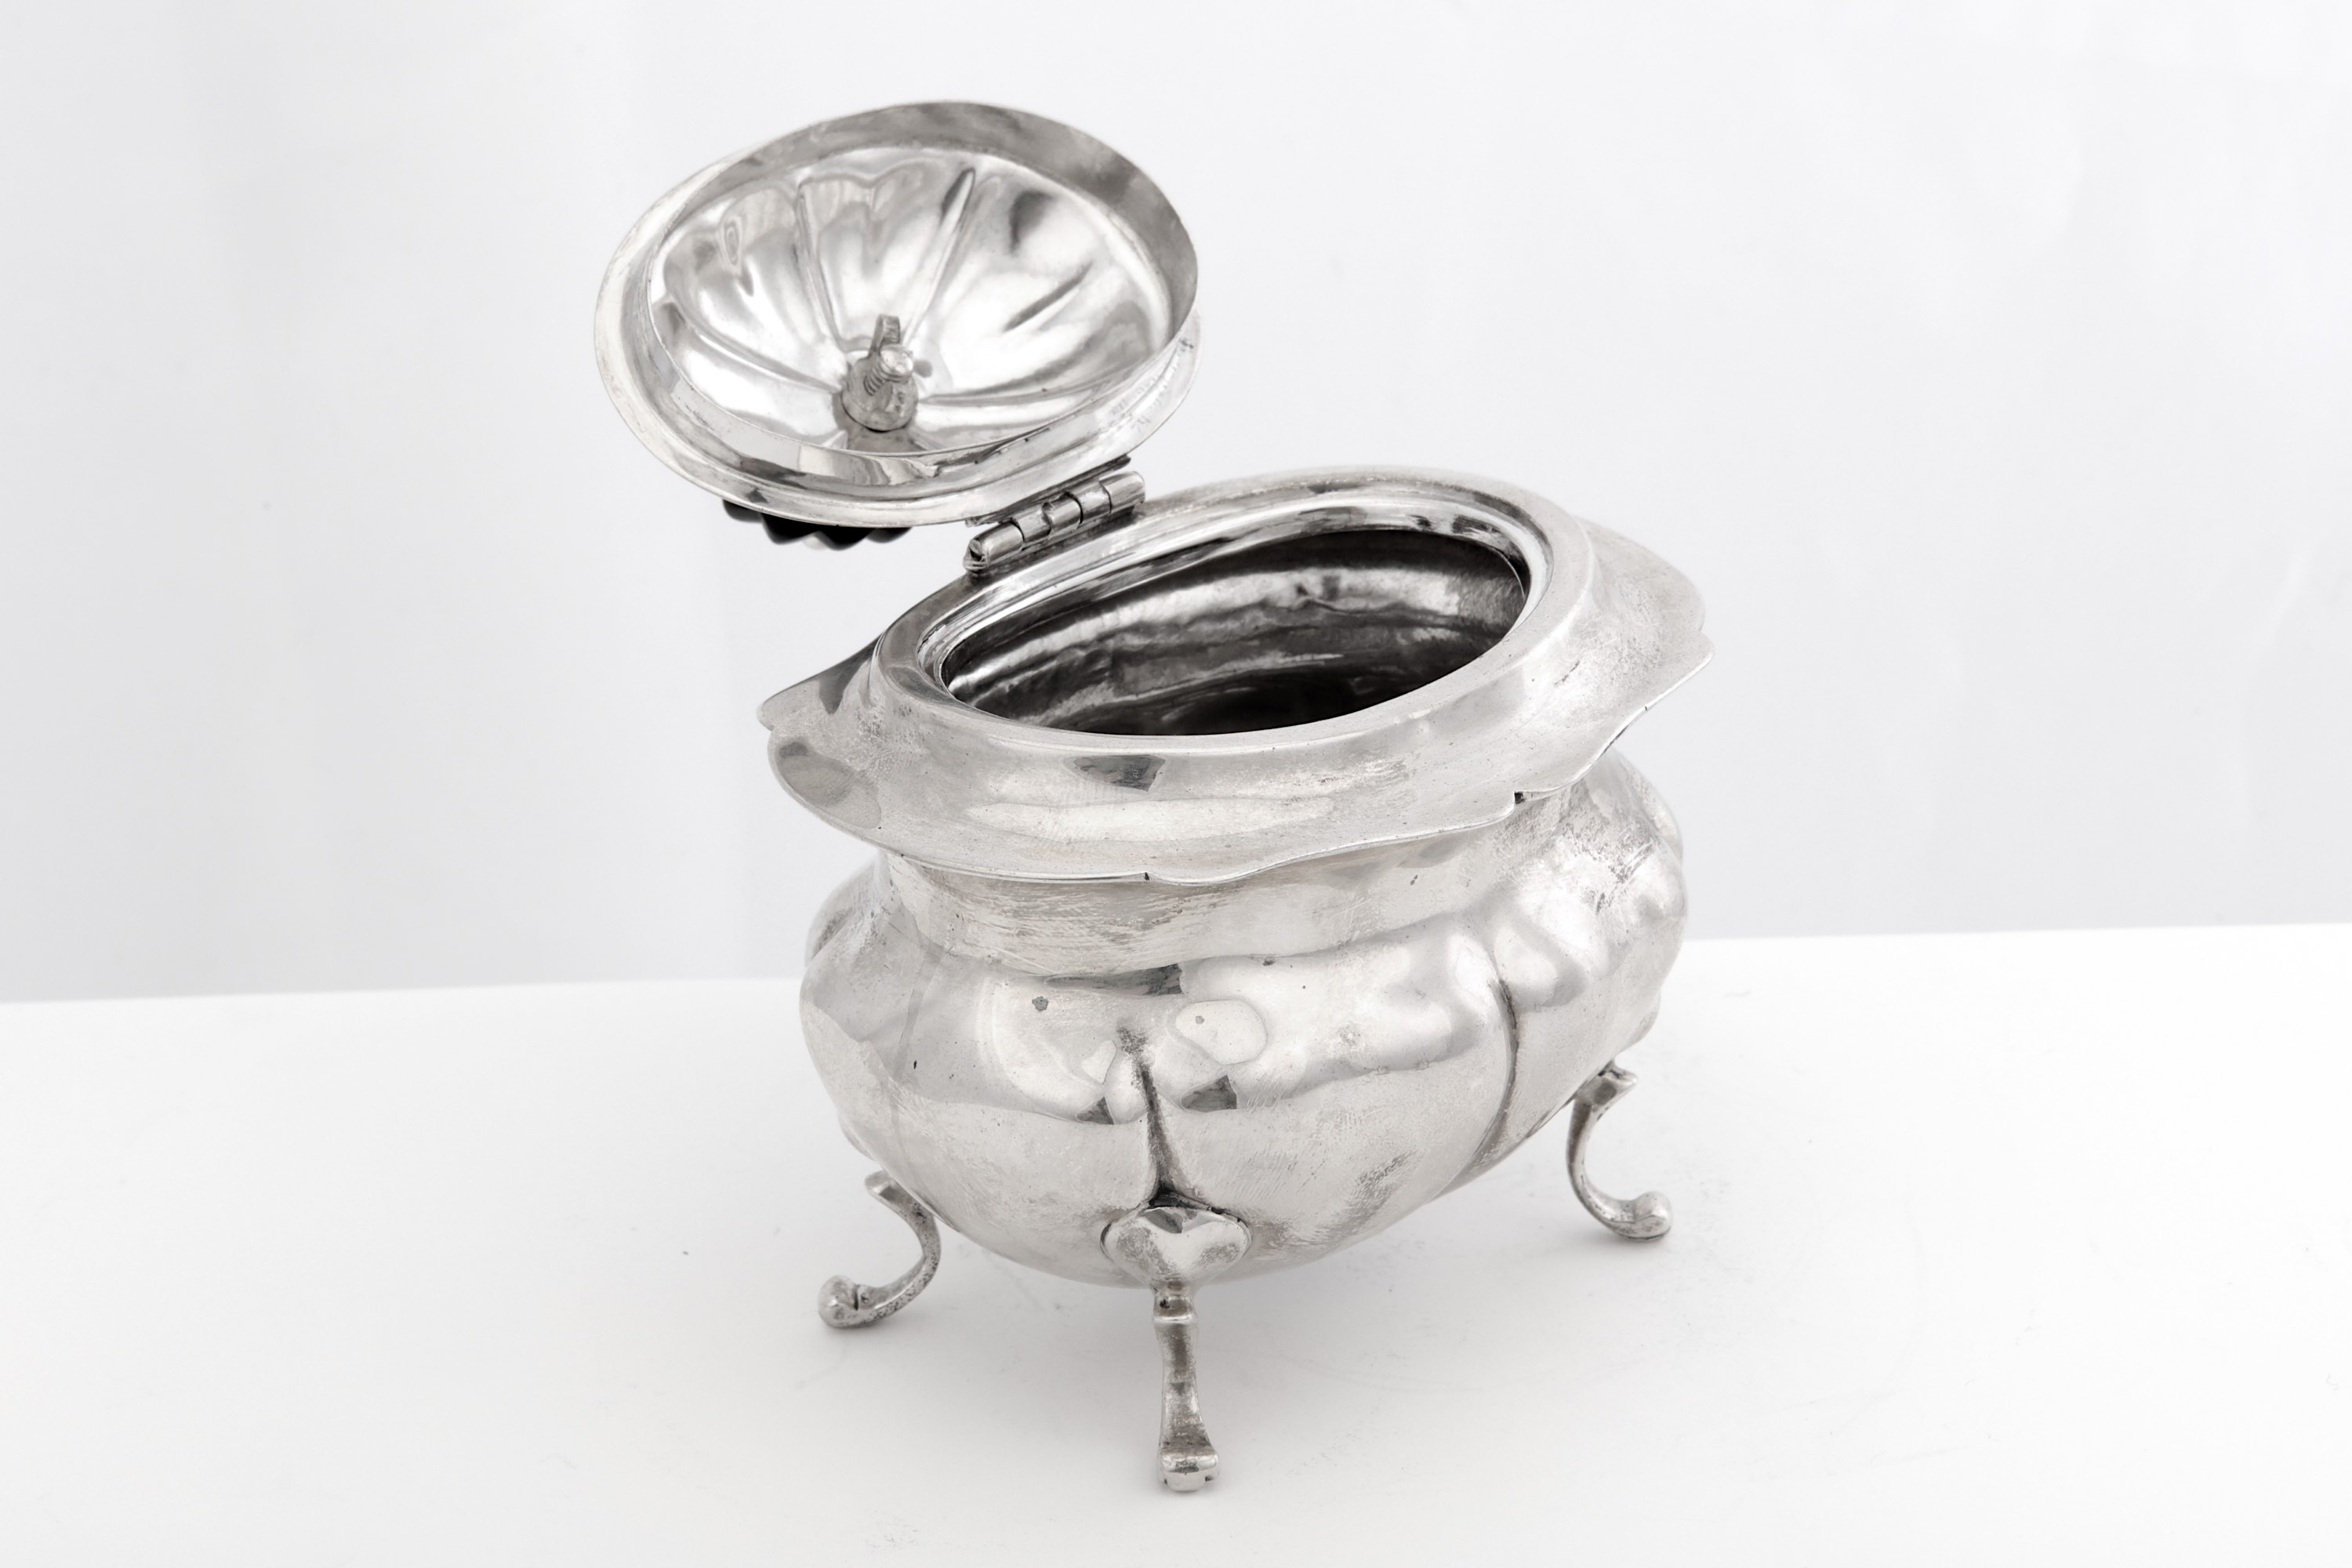 An Edwardian antique sterling silver tea caddy, Birmingham 1907, by George Unite - Image 2 of 3